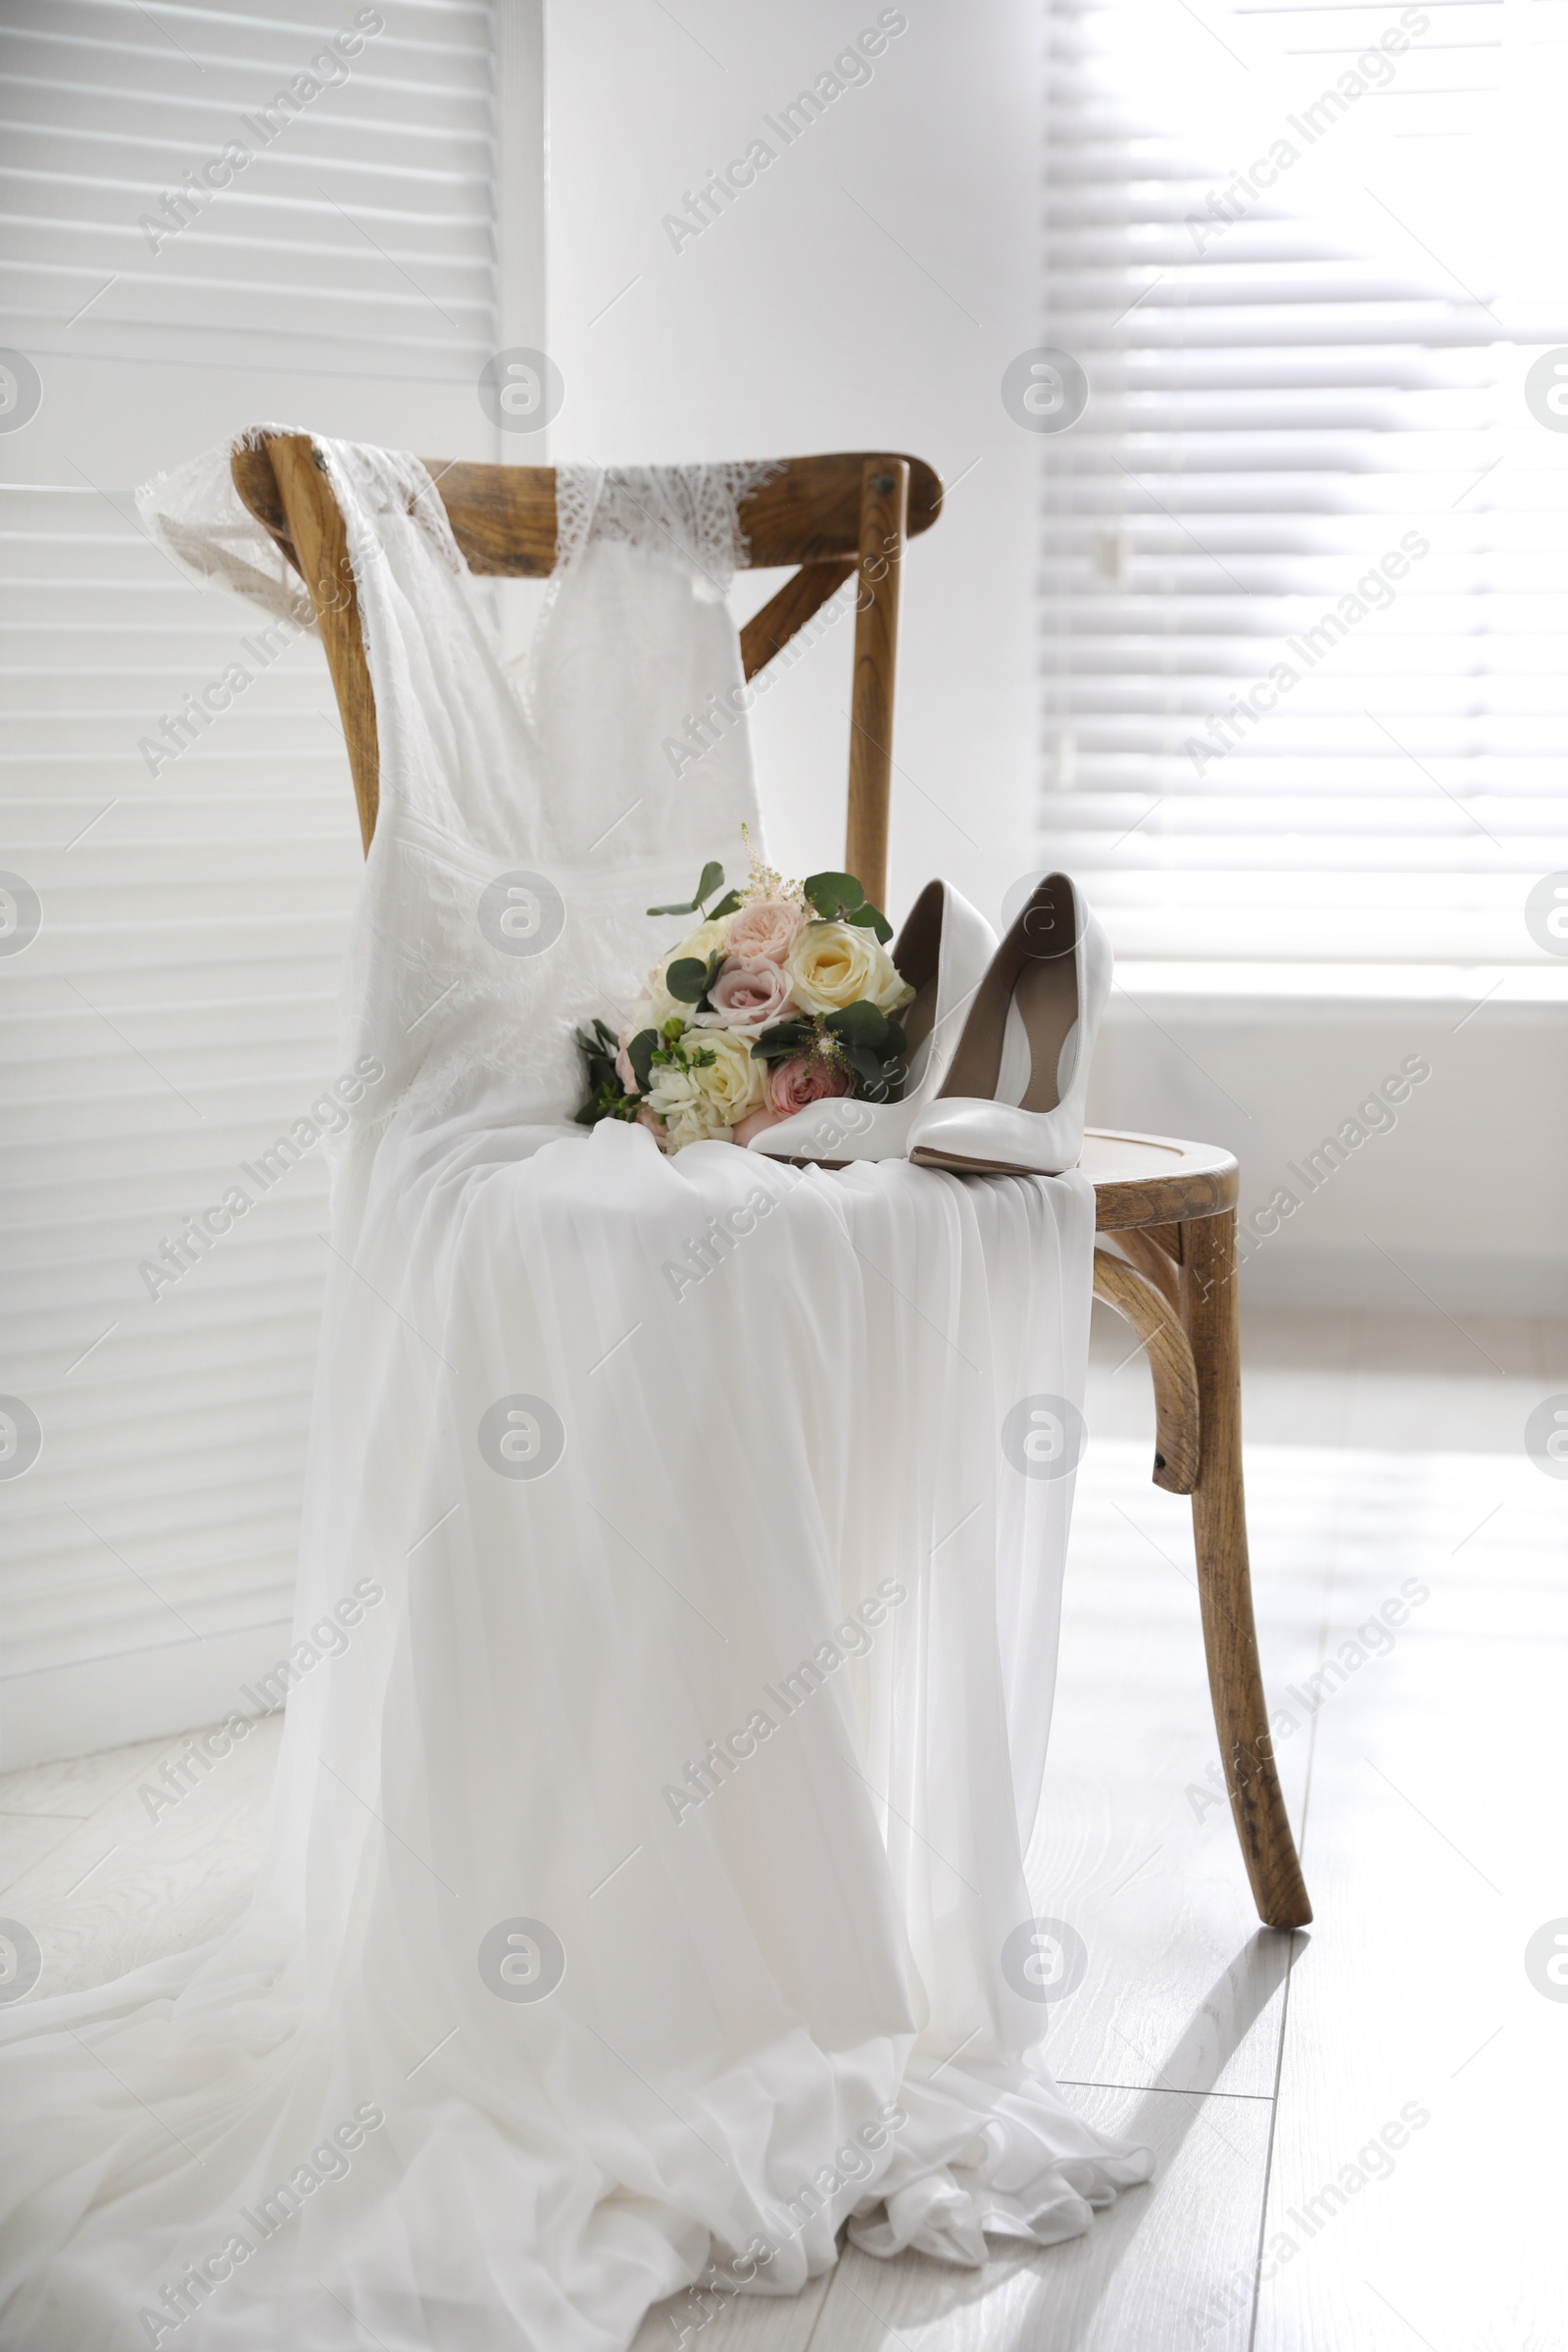 Photo of White high heel shoes, flowers and wedding dress on wooden chair indoors